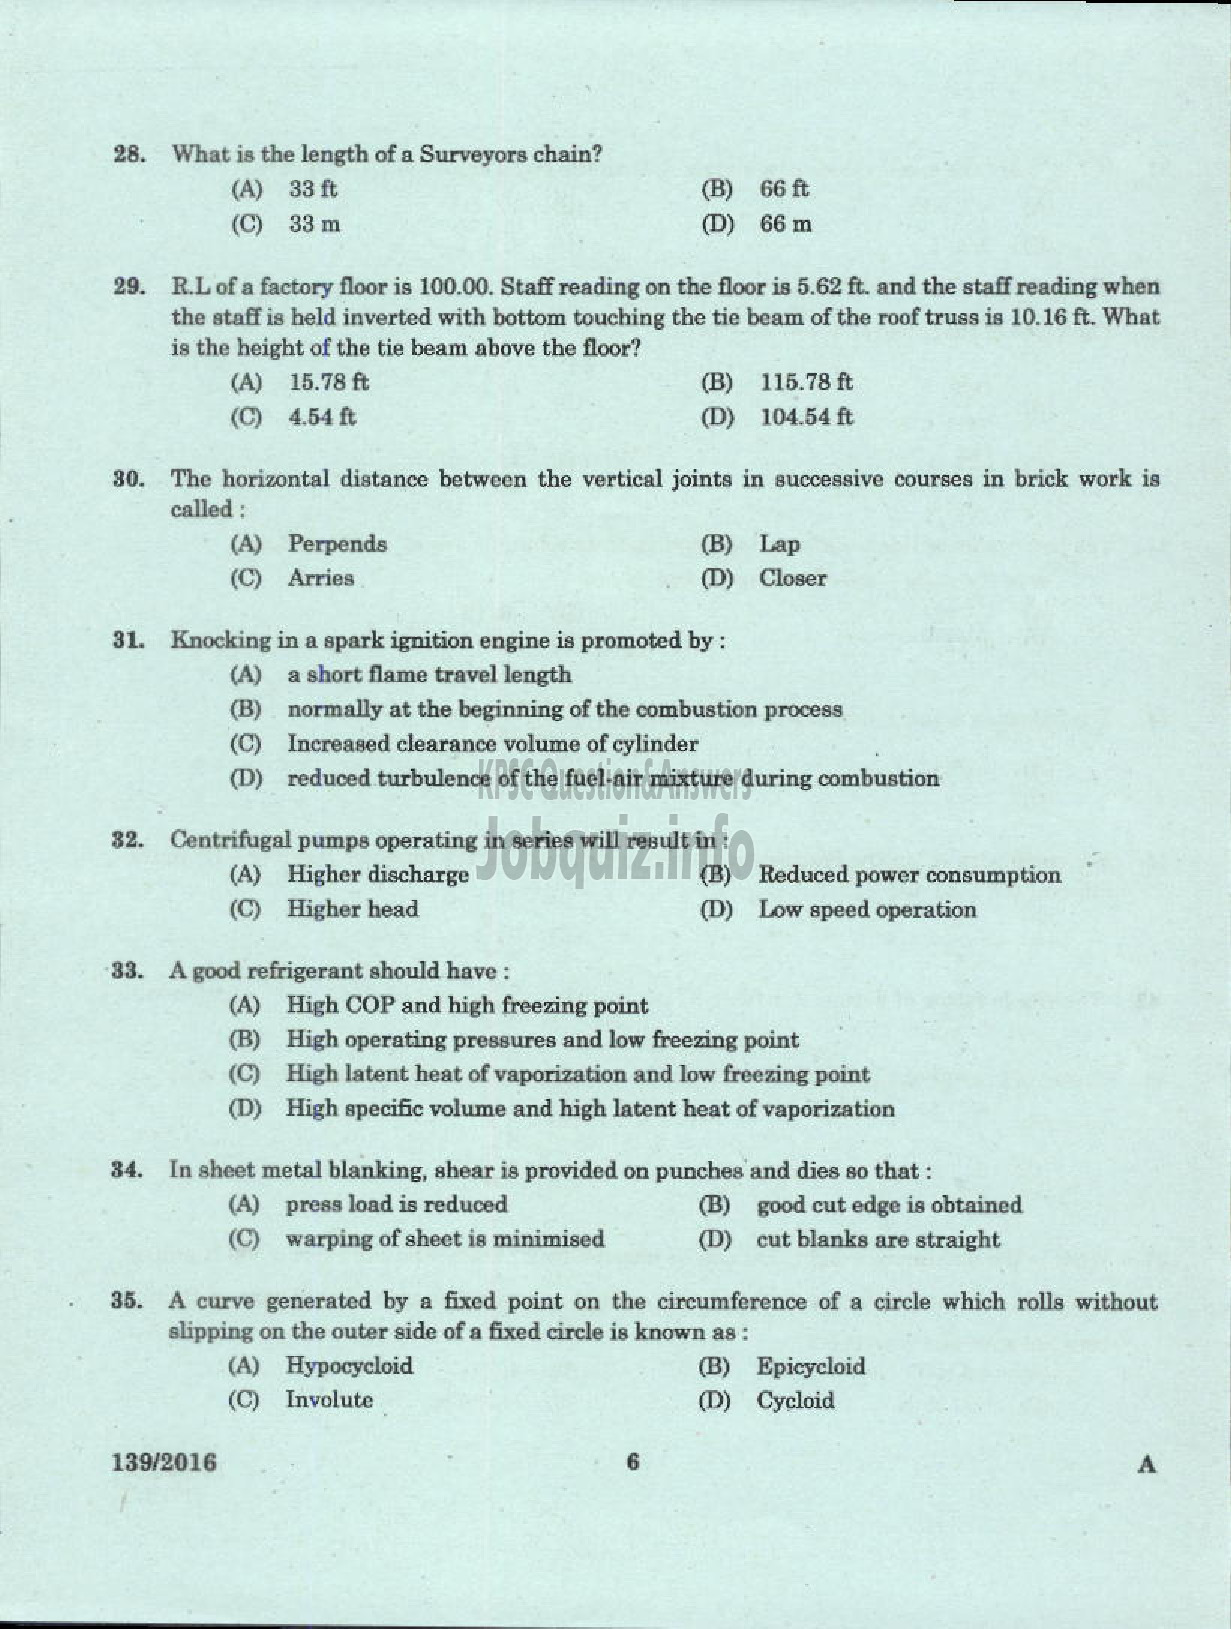 Kerala PSC Question Paper - ASSISTANT PROFESSOR CIVIL ENGINEERING TECHNICAL EDUCATION ENGINEERING COLLEGES-4